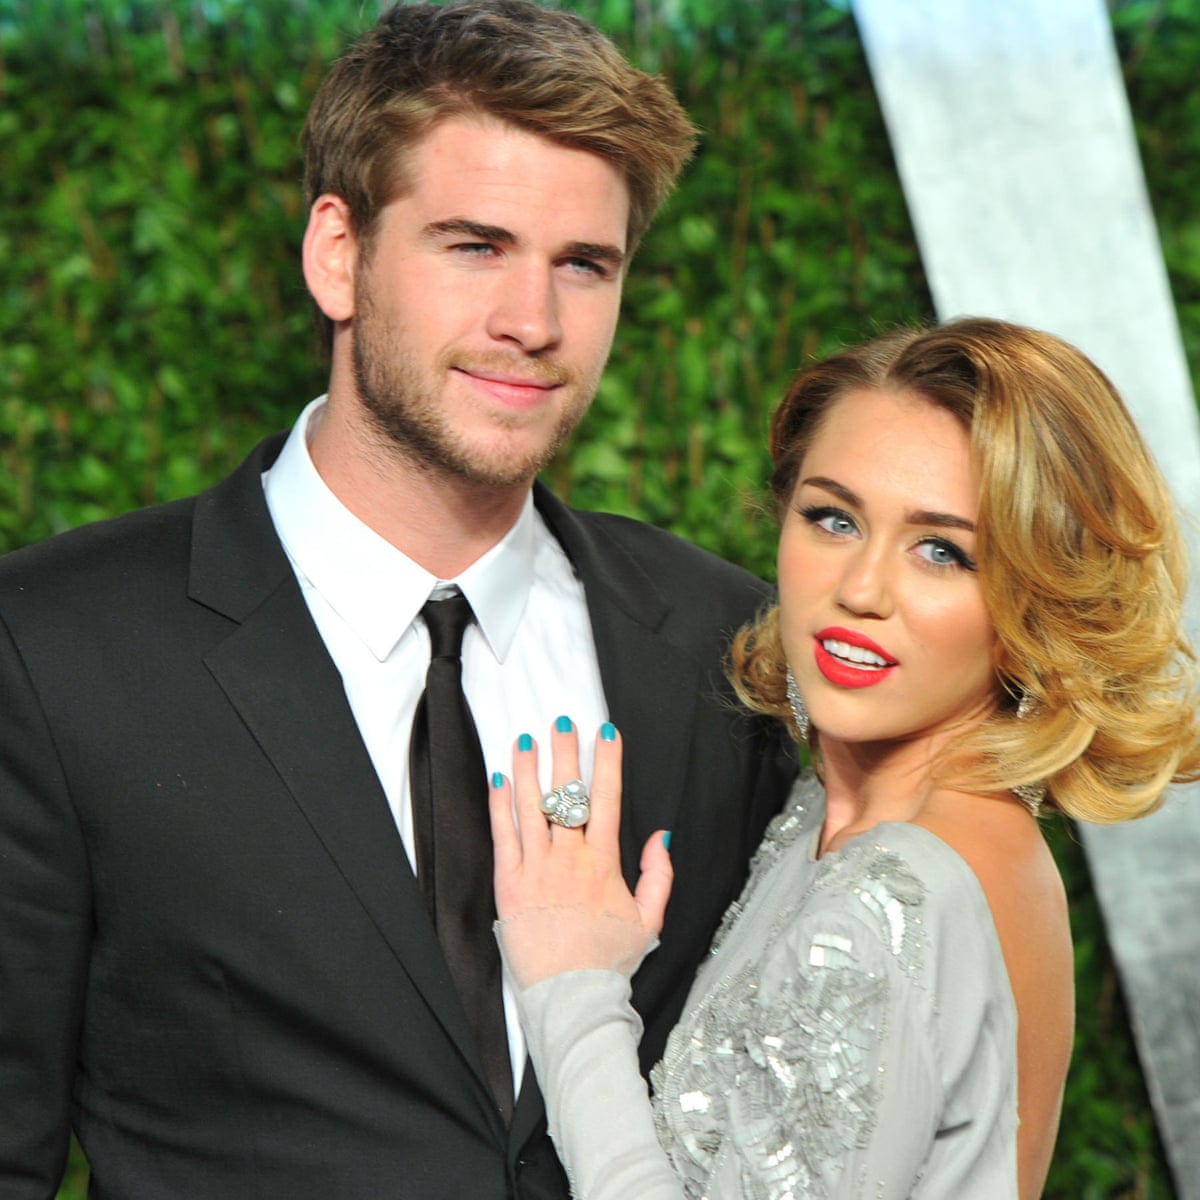 miley cyrus, girl, ring Wallpapers